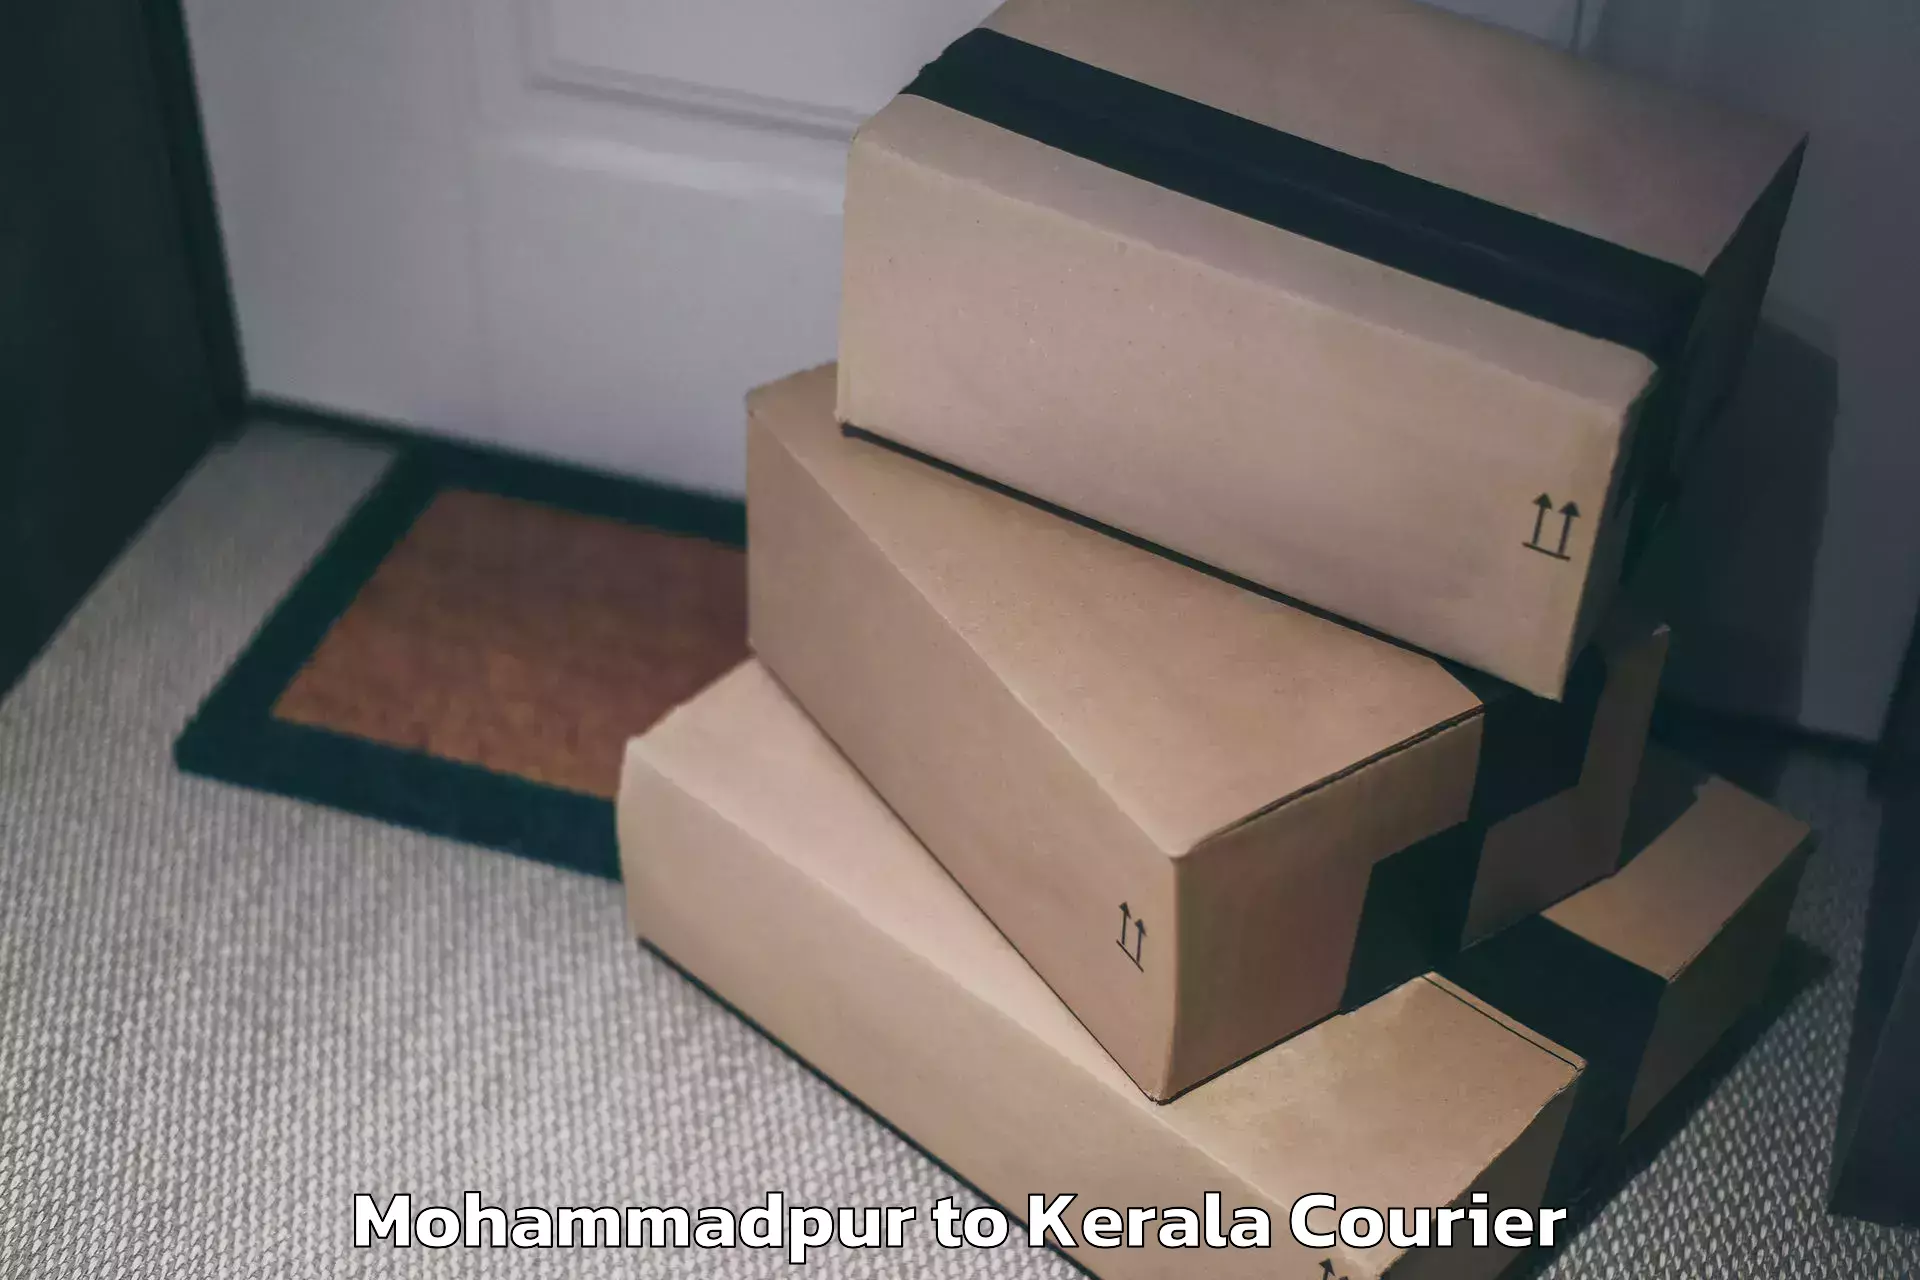 Luggage transport consultancy Mohammadpur to Kerala